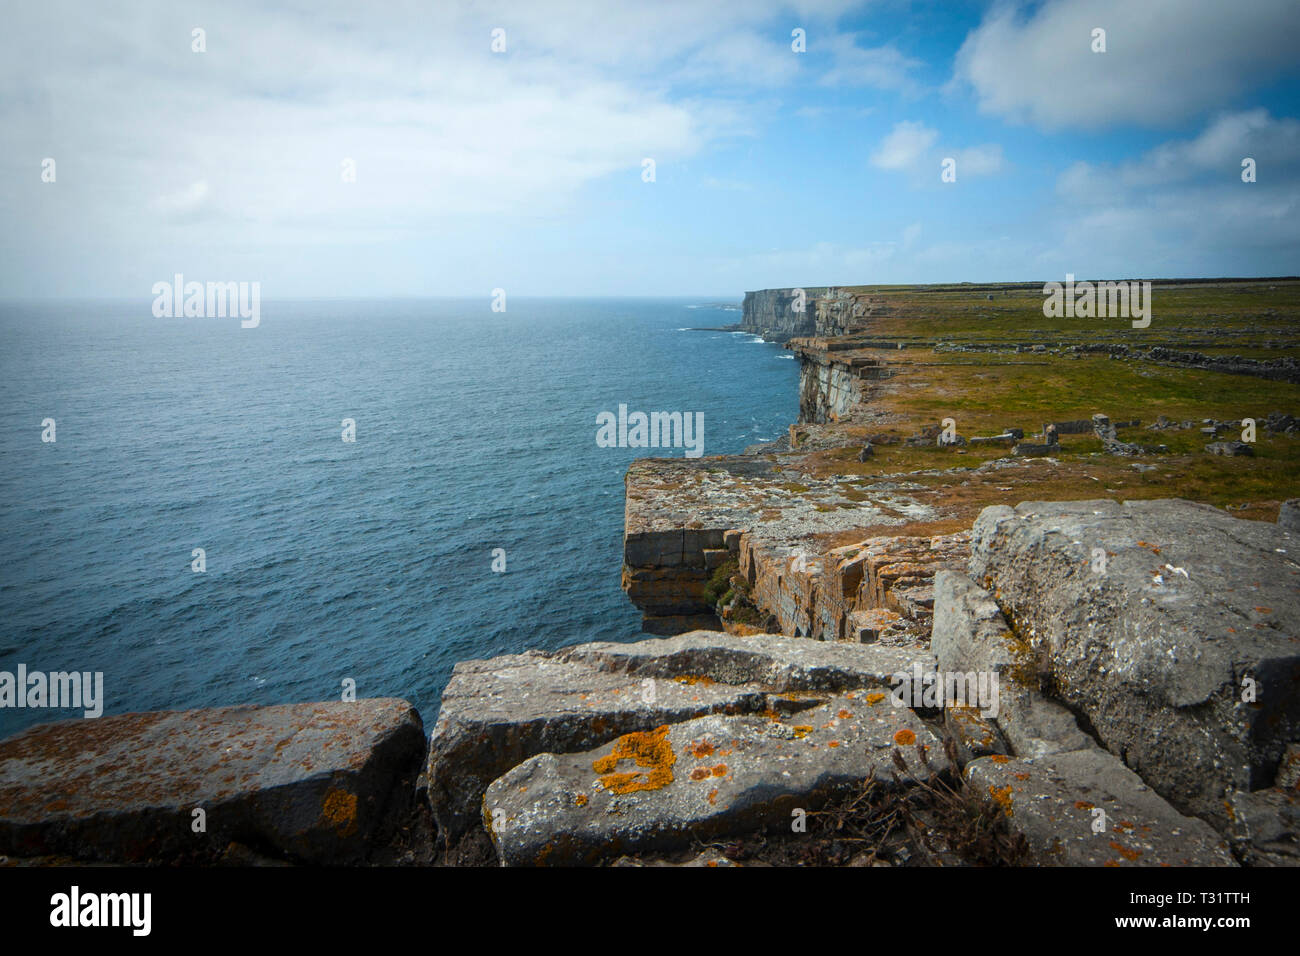 The imposing Dun Aengus Stone Fort, Inishmore, the Aran Islands, off Ireland's west coast. The fort is preched on a windswept 100-metre high cliff abo Stock Photo